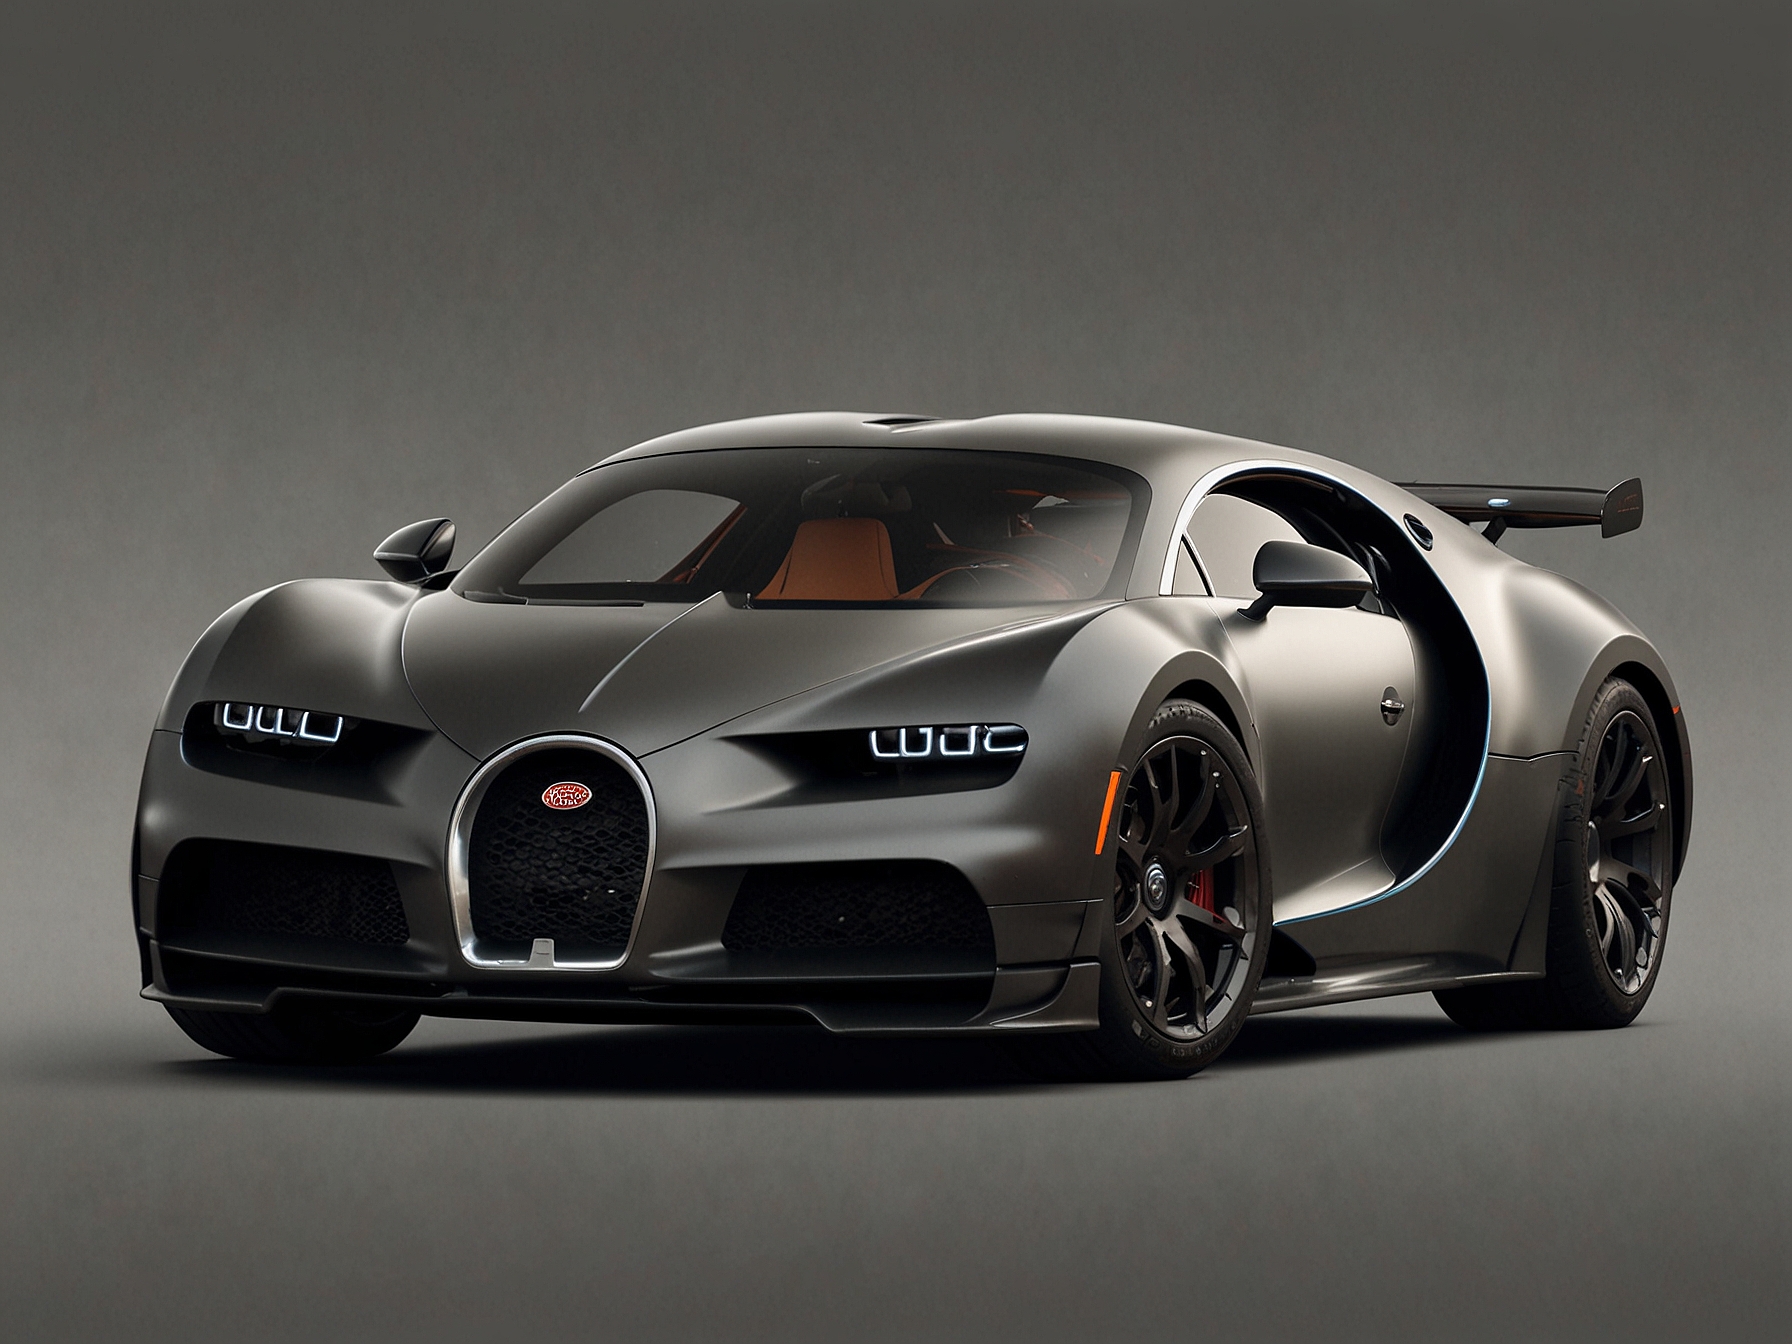 The Bugatti hypercar is capturing attention with its sleek, aerodynamic exterior. Showcasing its fluid lines and functional venting, the car's design emphasizes both aesthetics and performance.